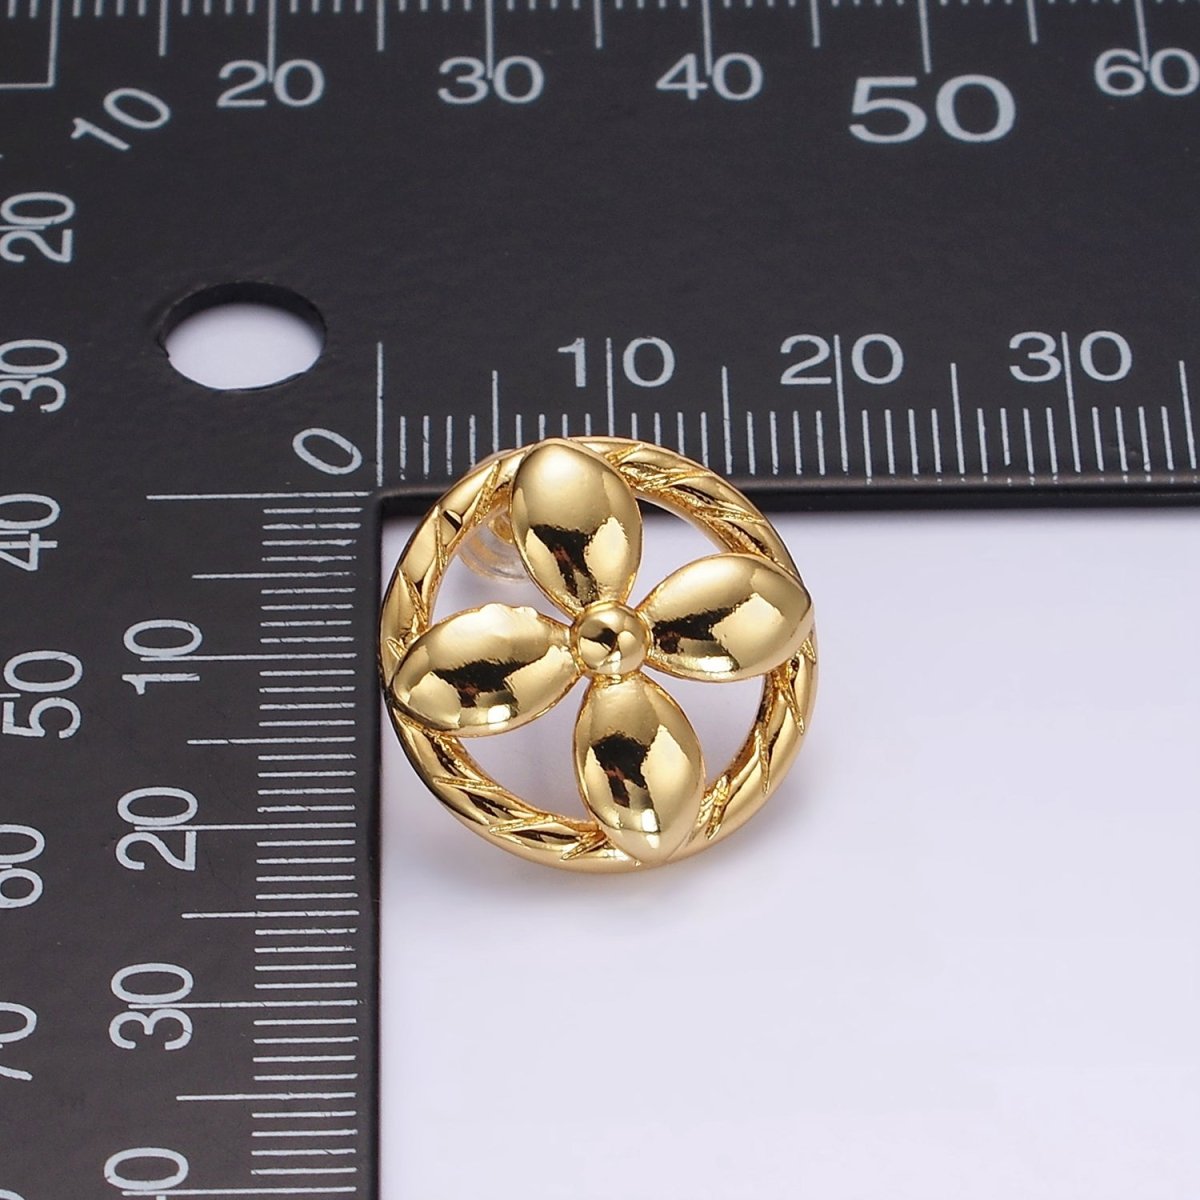 14K Gold Filled Flower Nature Open Lined Braided Round Stud Earrings | AE1004 - DLUXCA